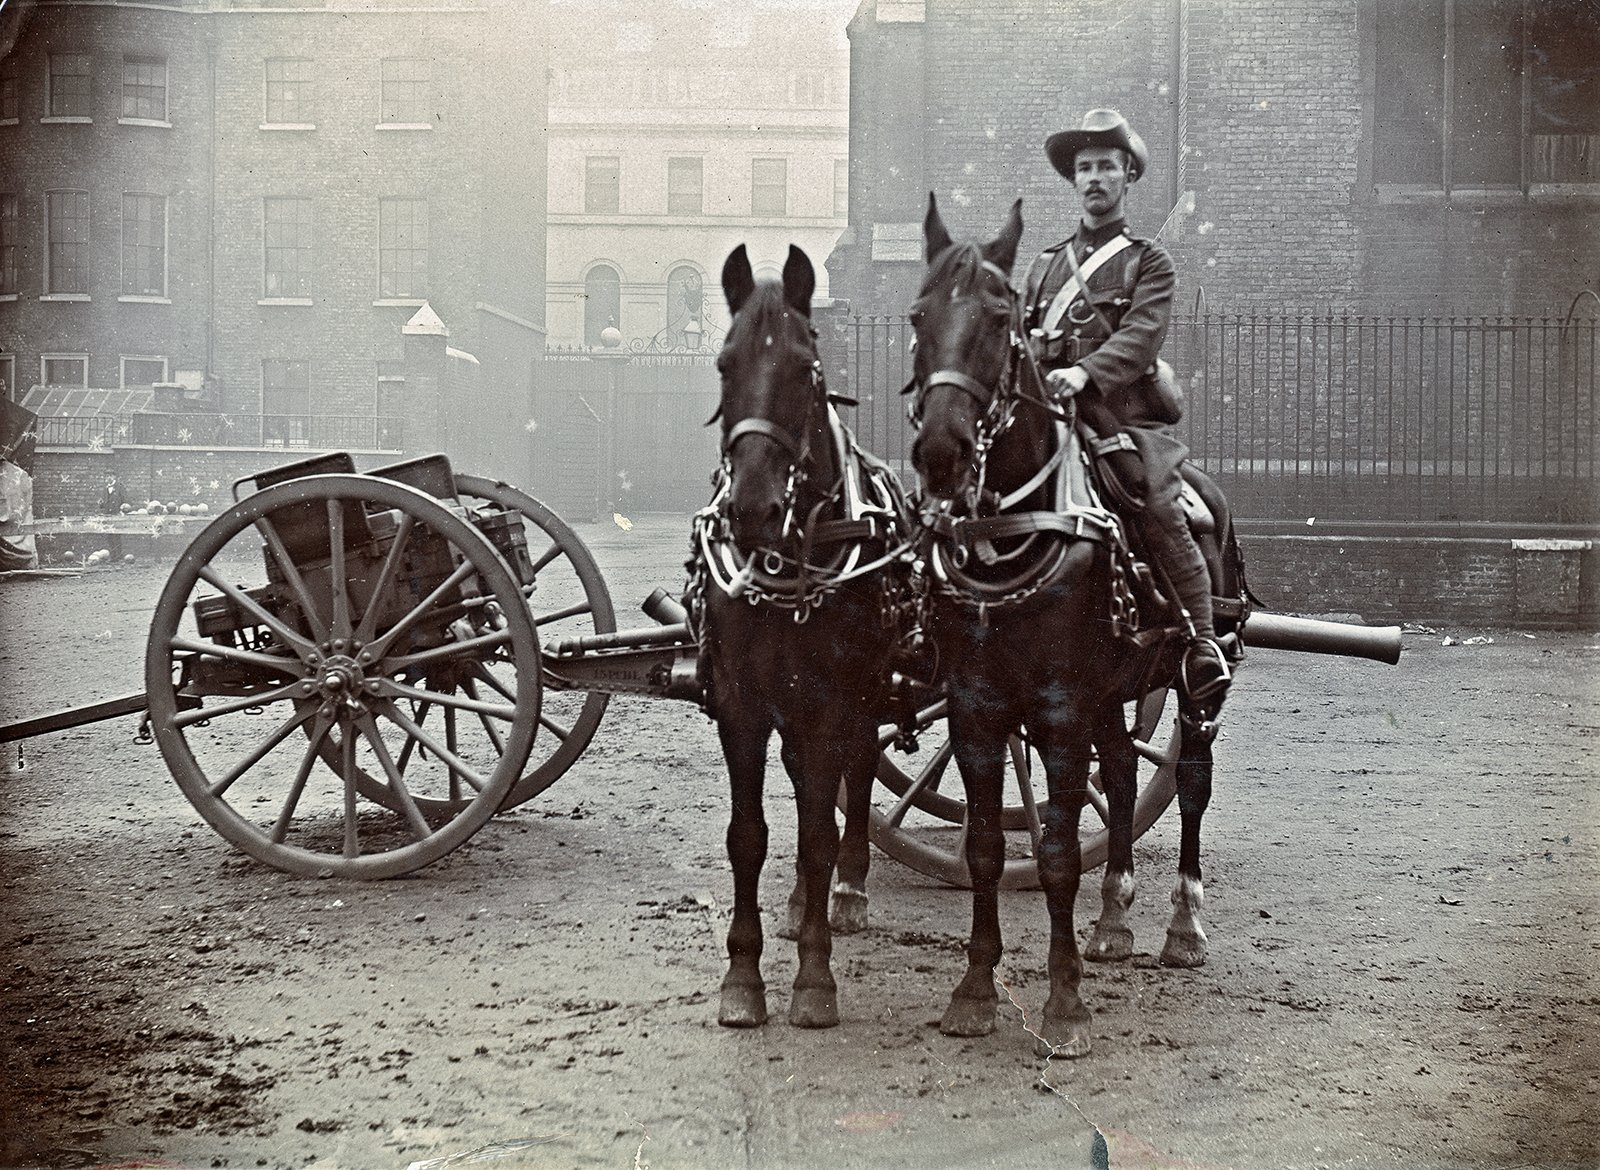 Erskine Childers in his City Imperial Volunteers (CIV) uniform, driving a Battery canon, Adelphi, London, 1899.